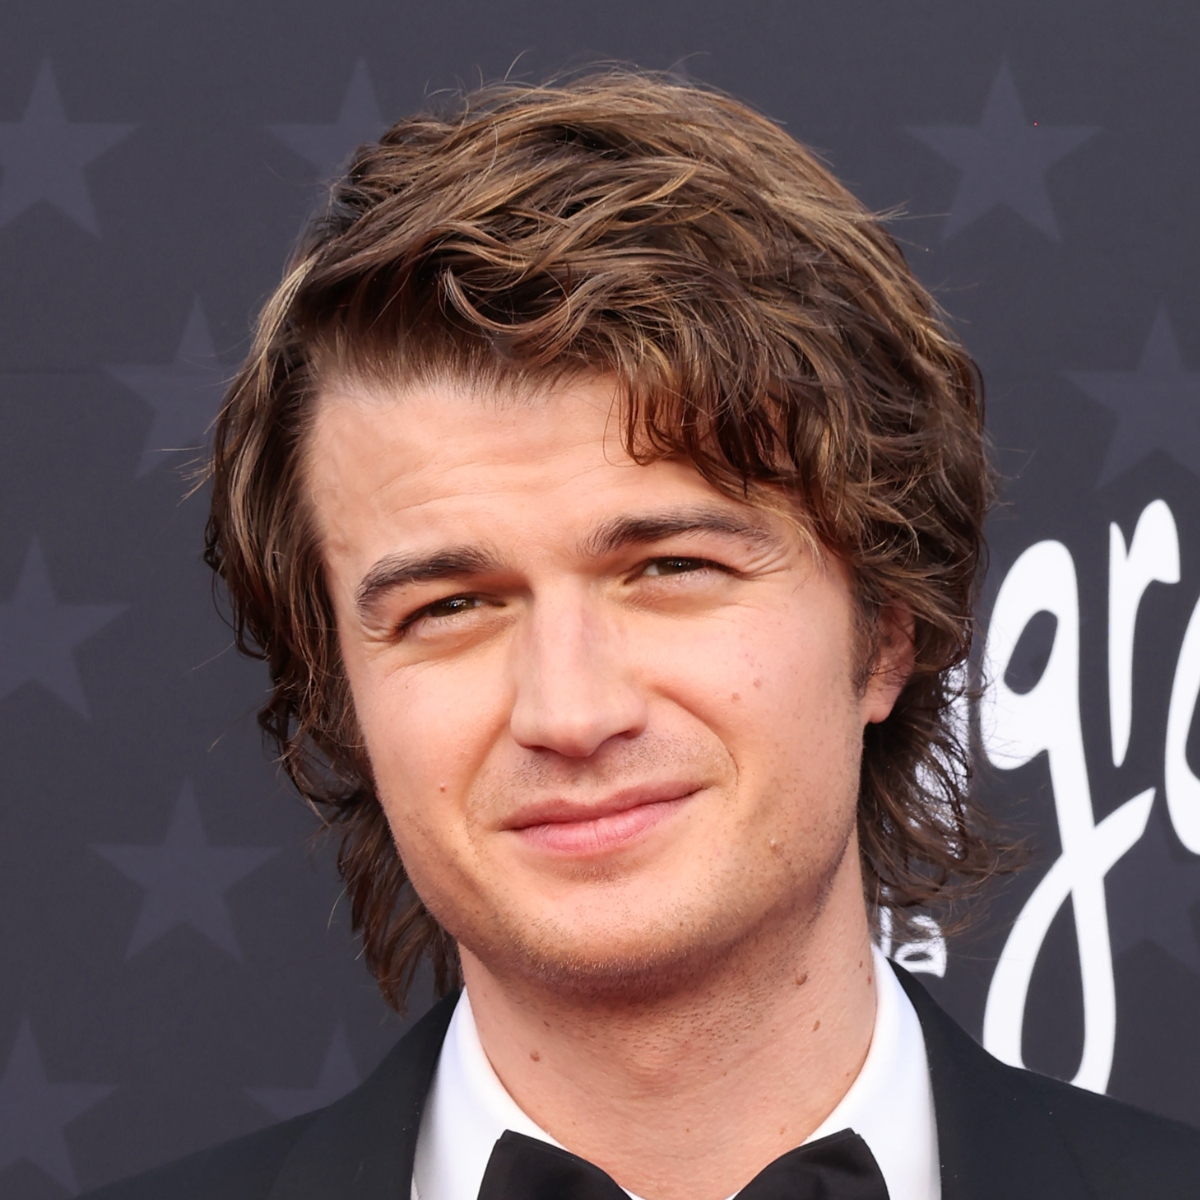 Joe Keery Facts: 5 Things To Know About 'Stranger Things' Actor